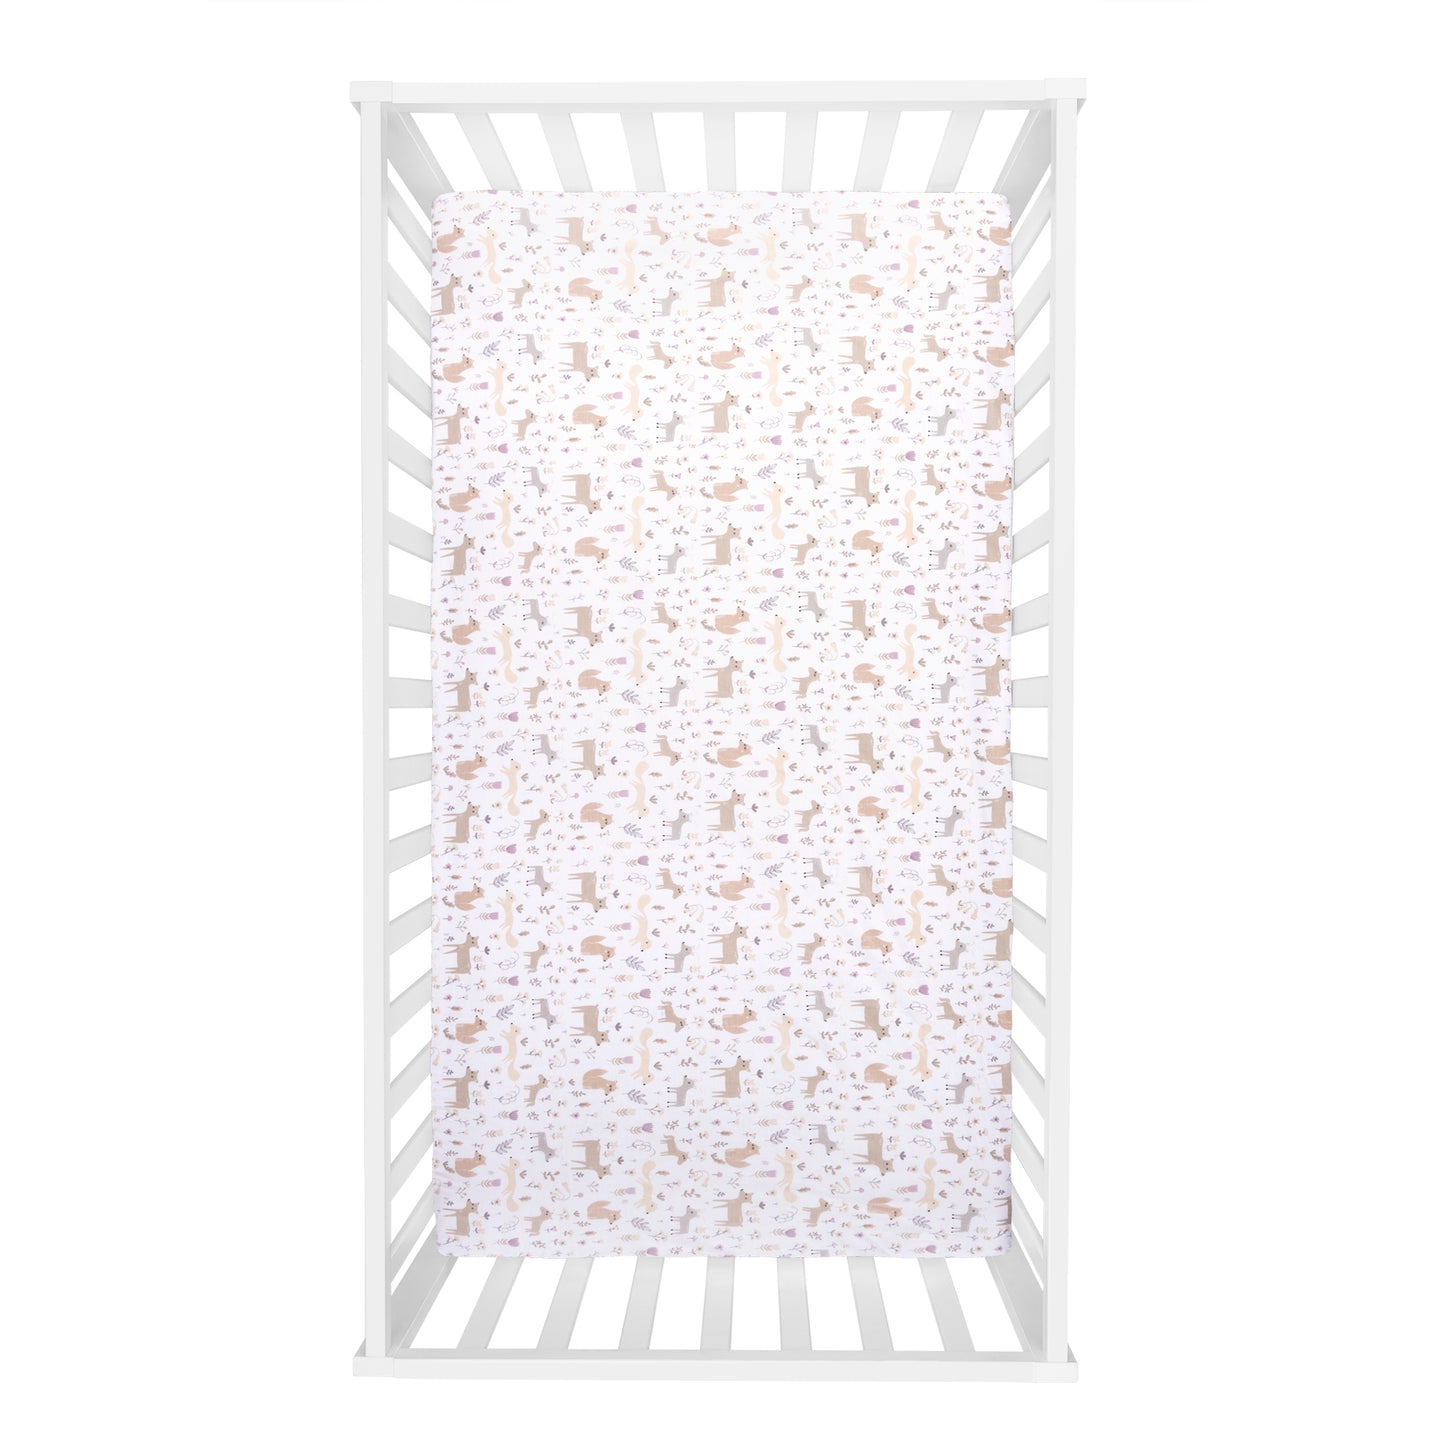 Second crib sheet features a forest animal print